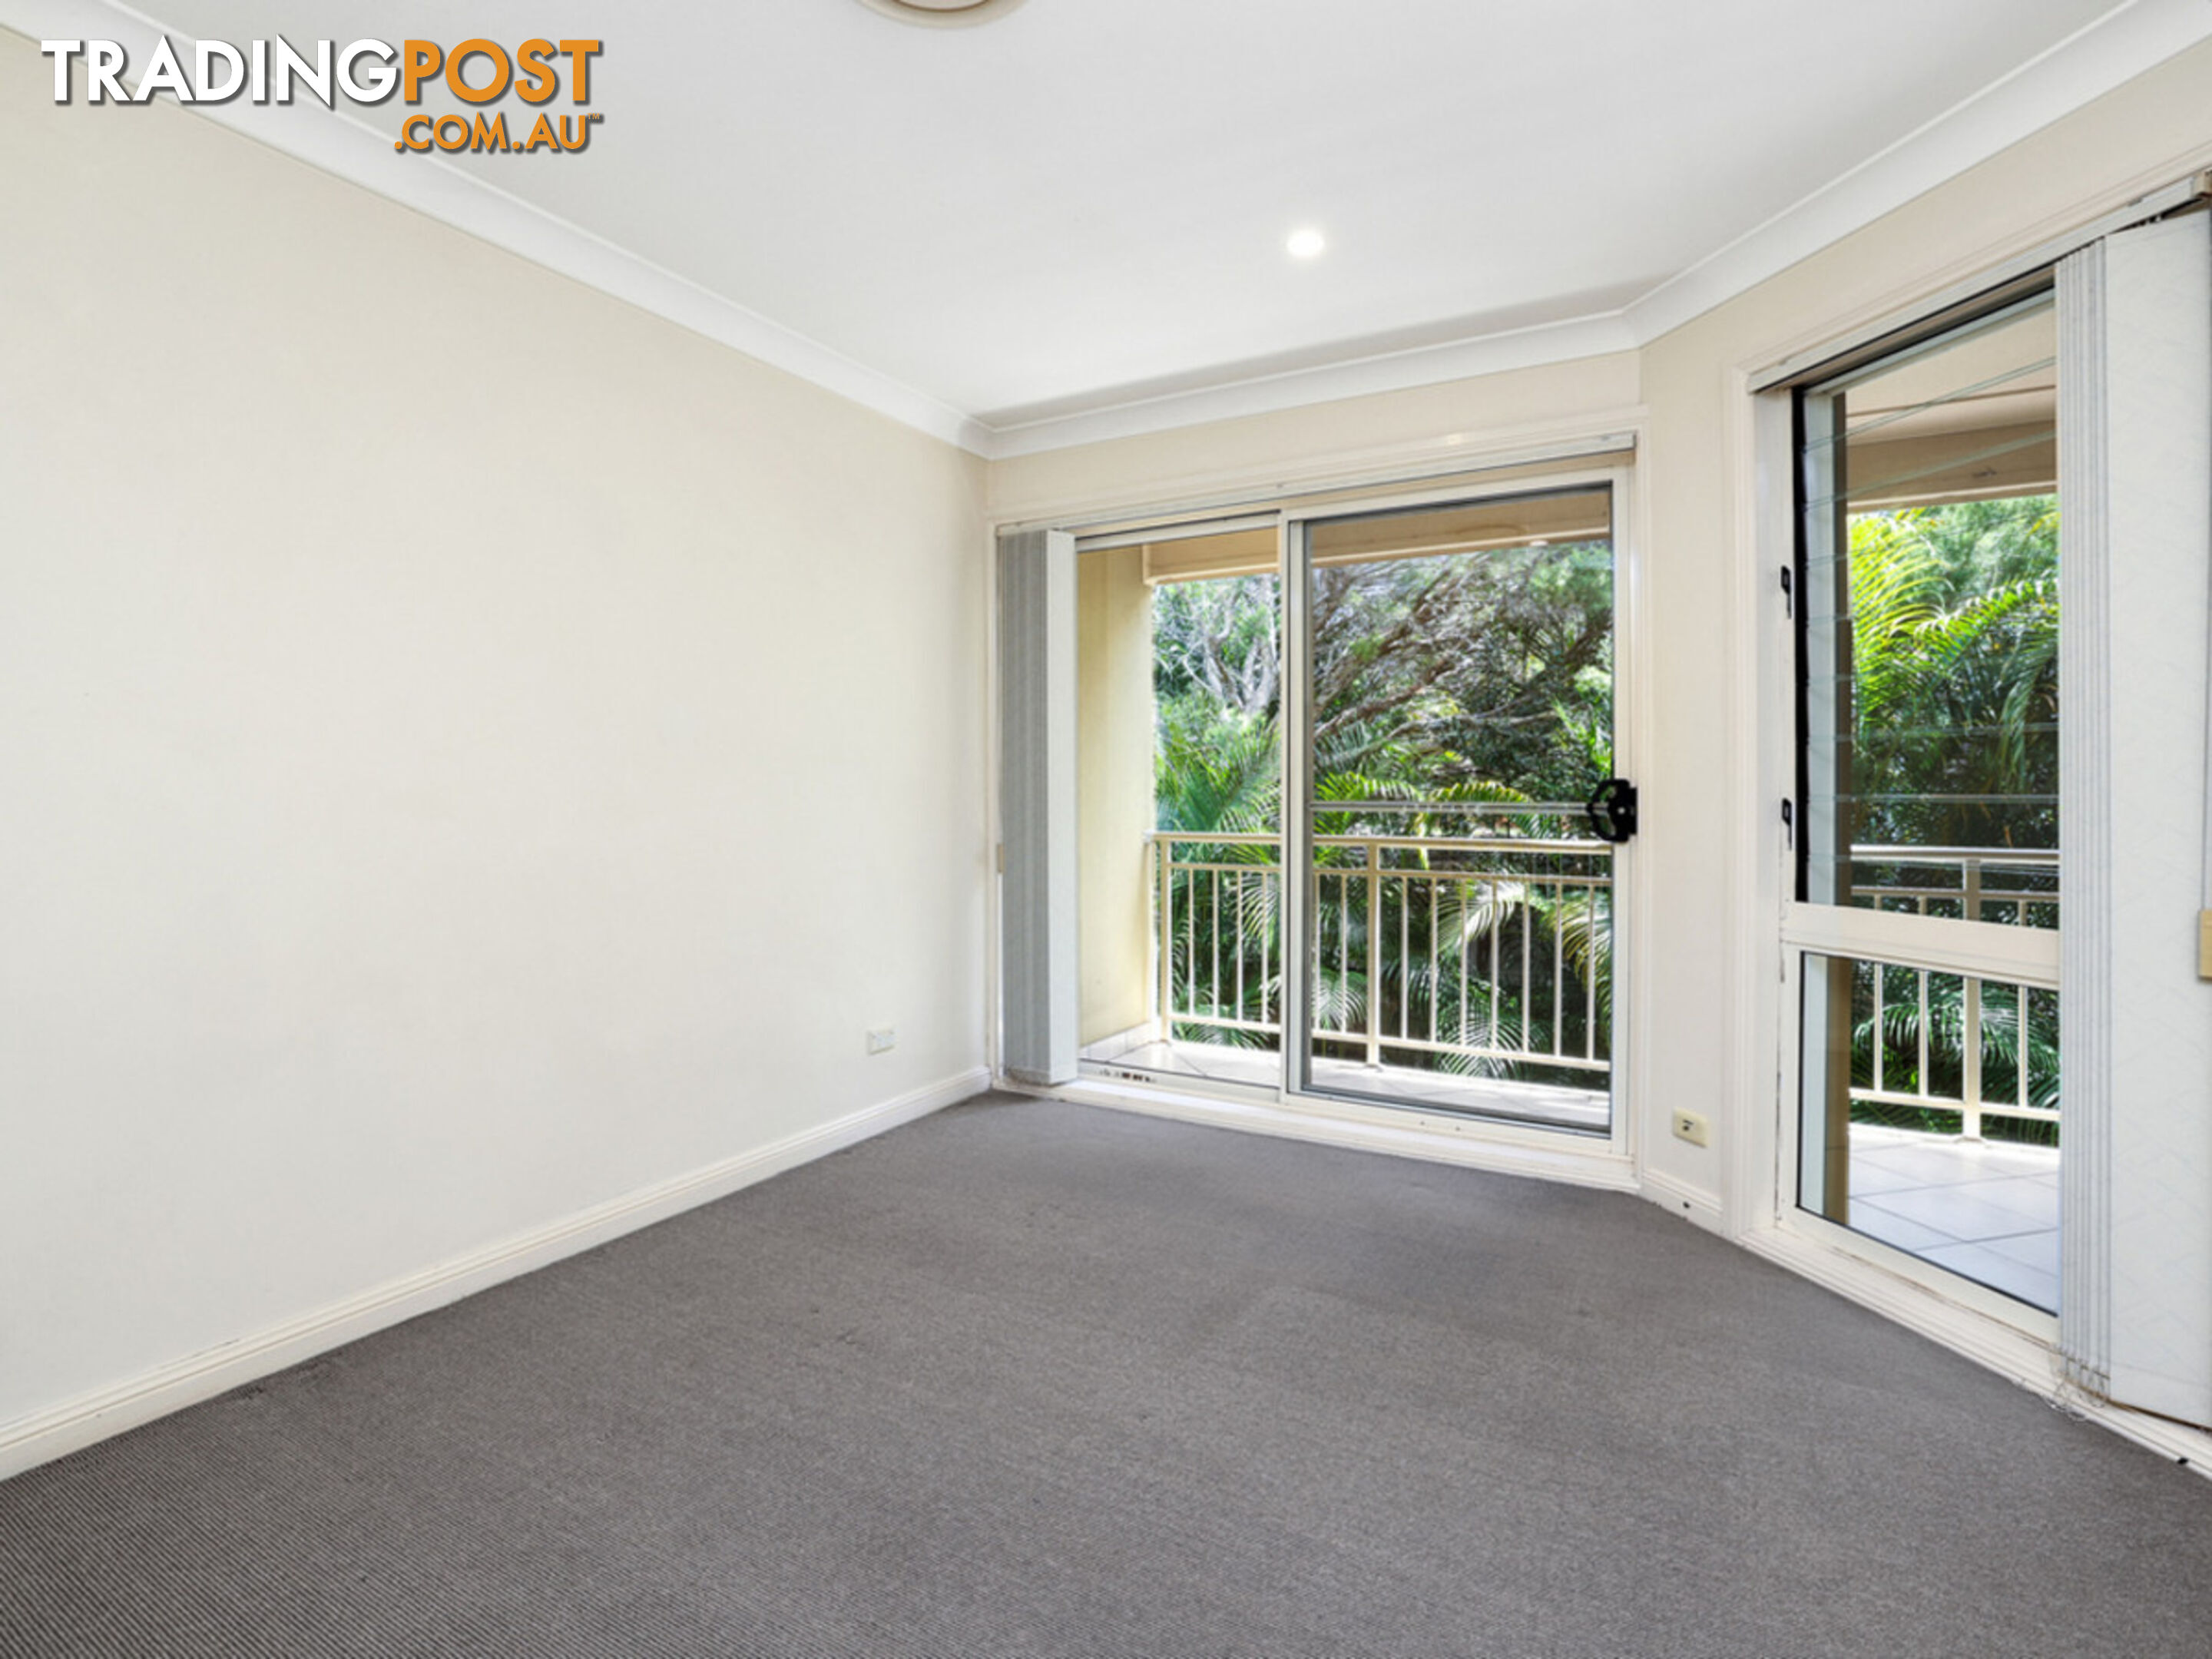 8/1630-1632 Pittwater Road MONA VALE NSW 2103